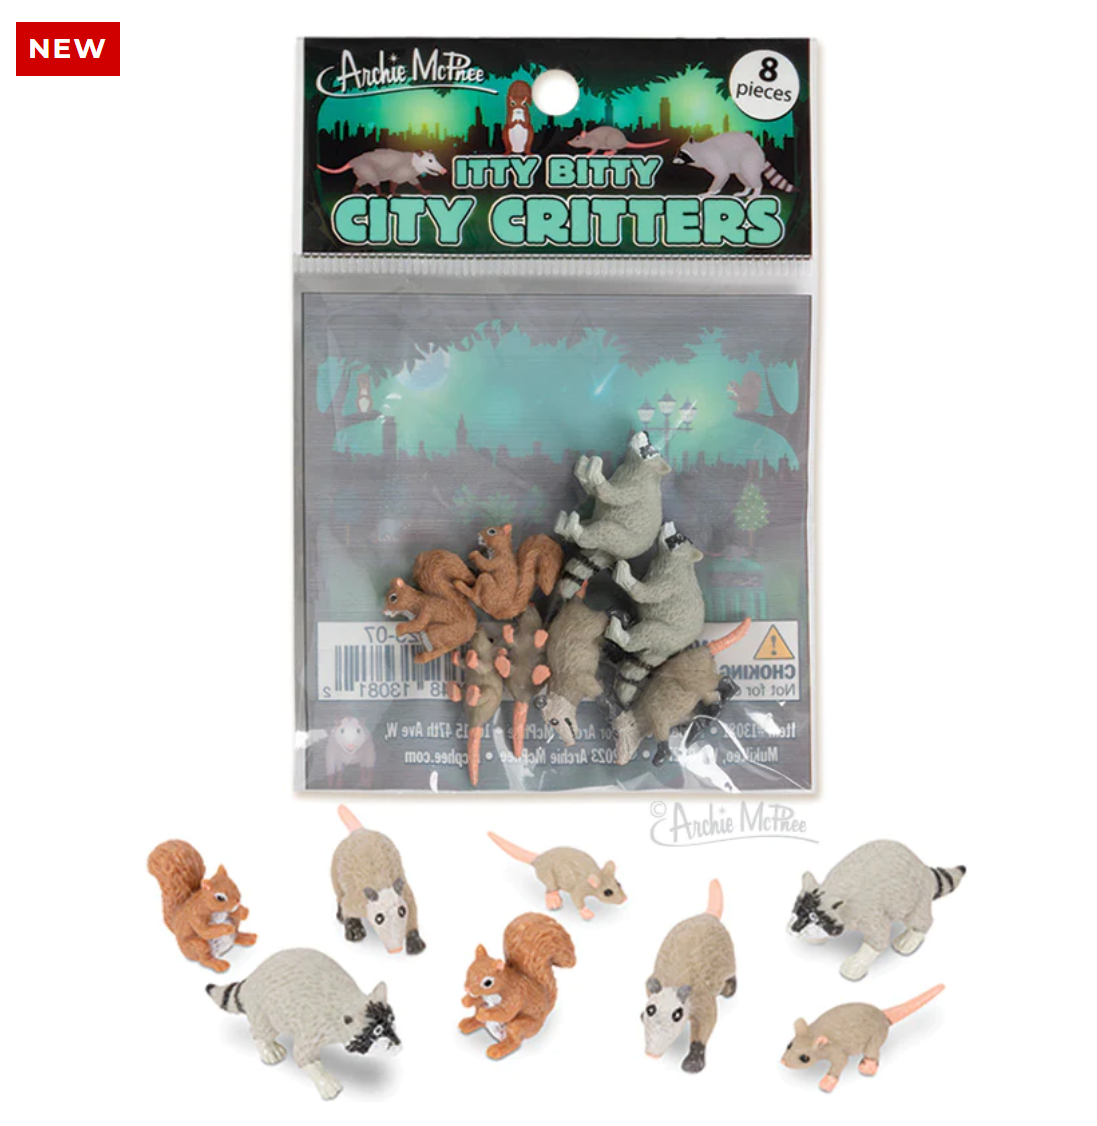 Archie McPhee - Itty Bitty City Critters